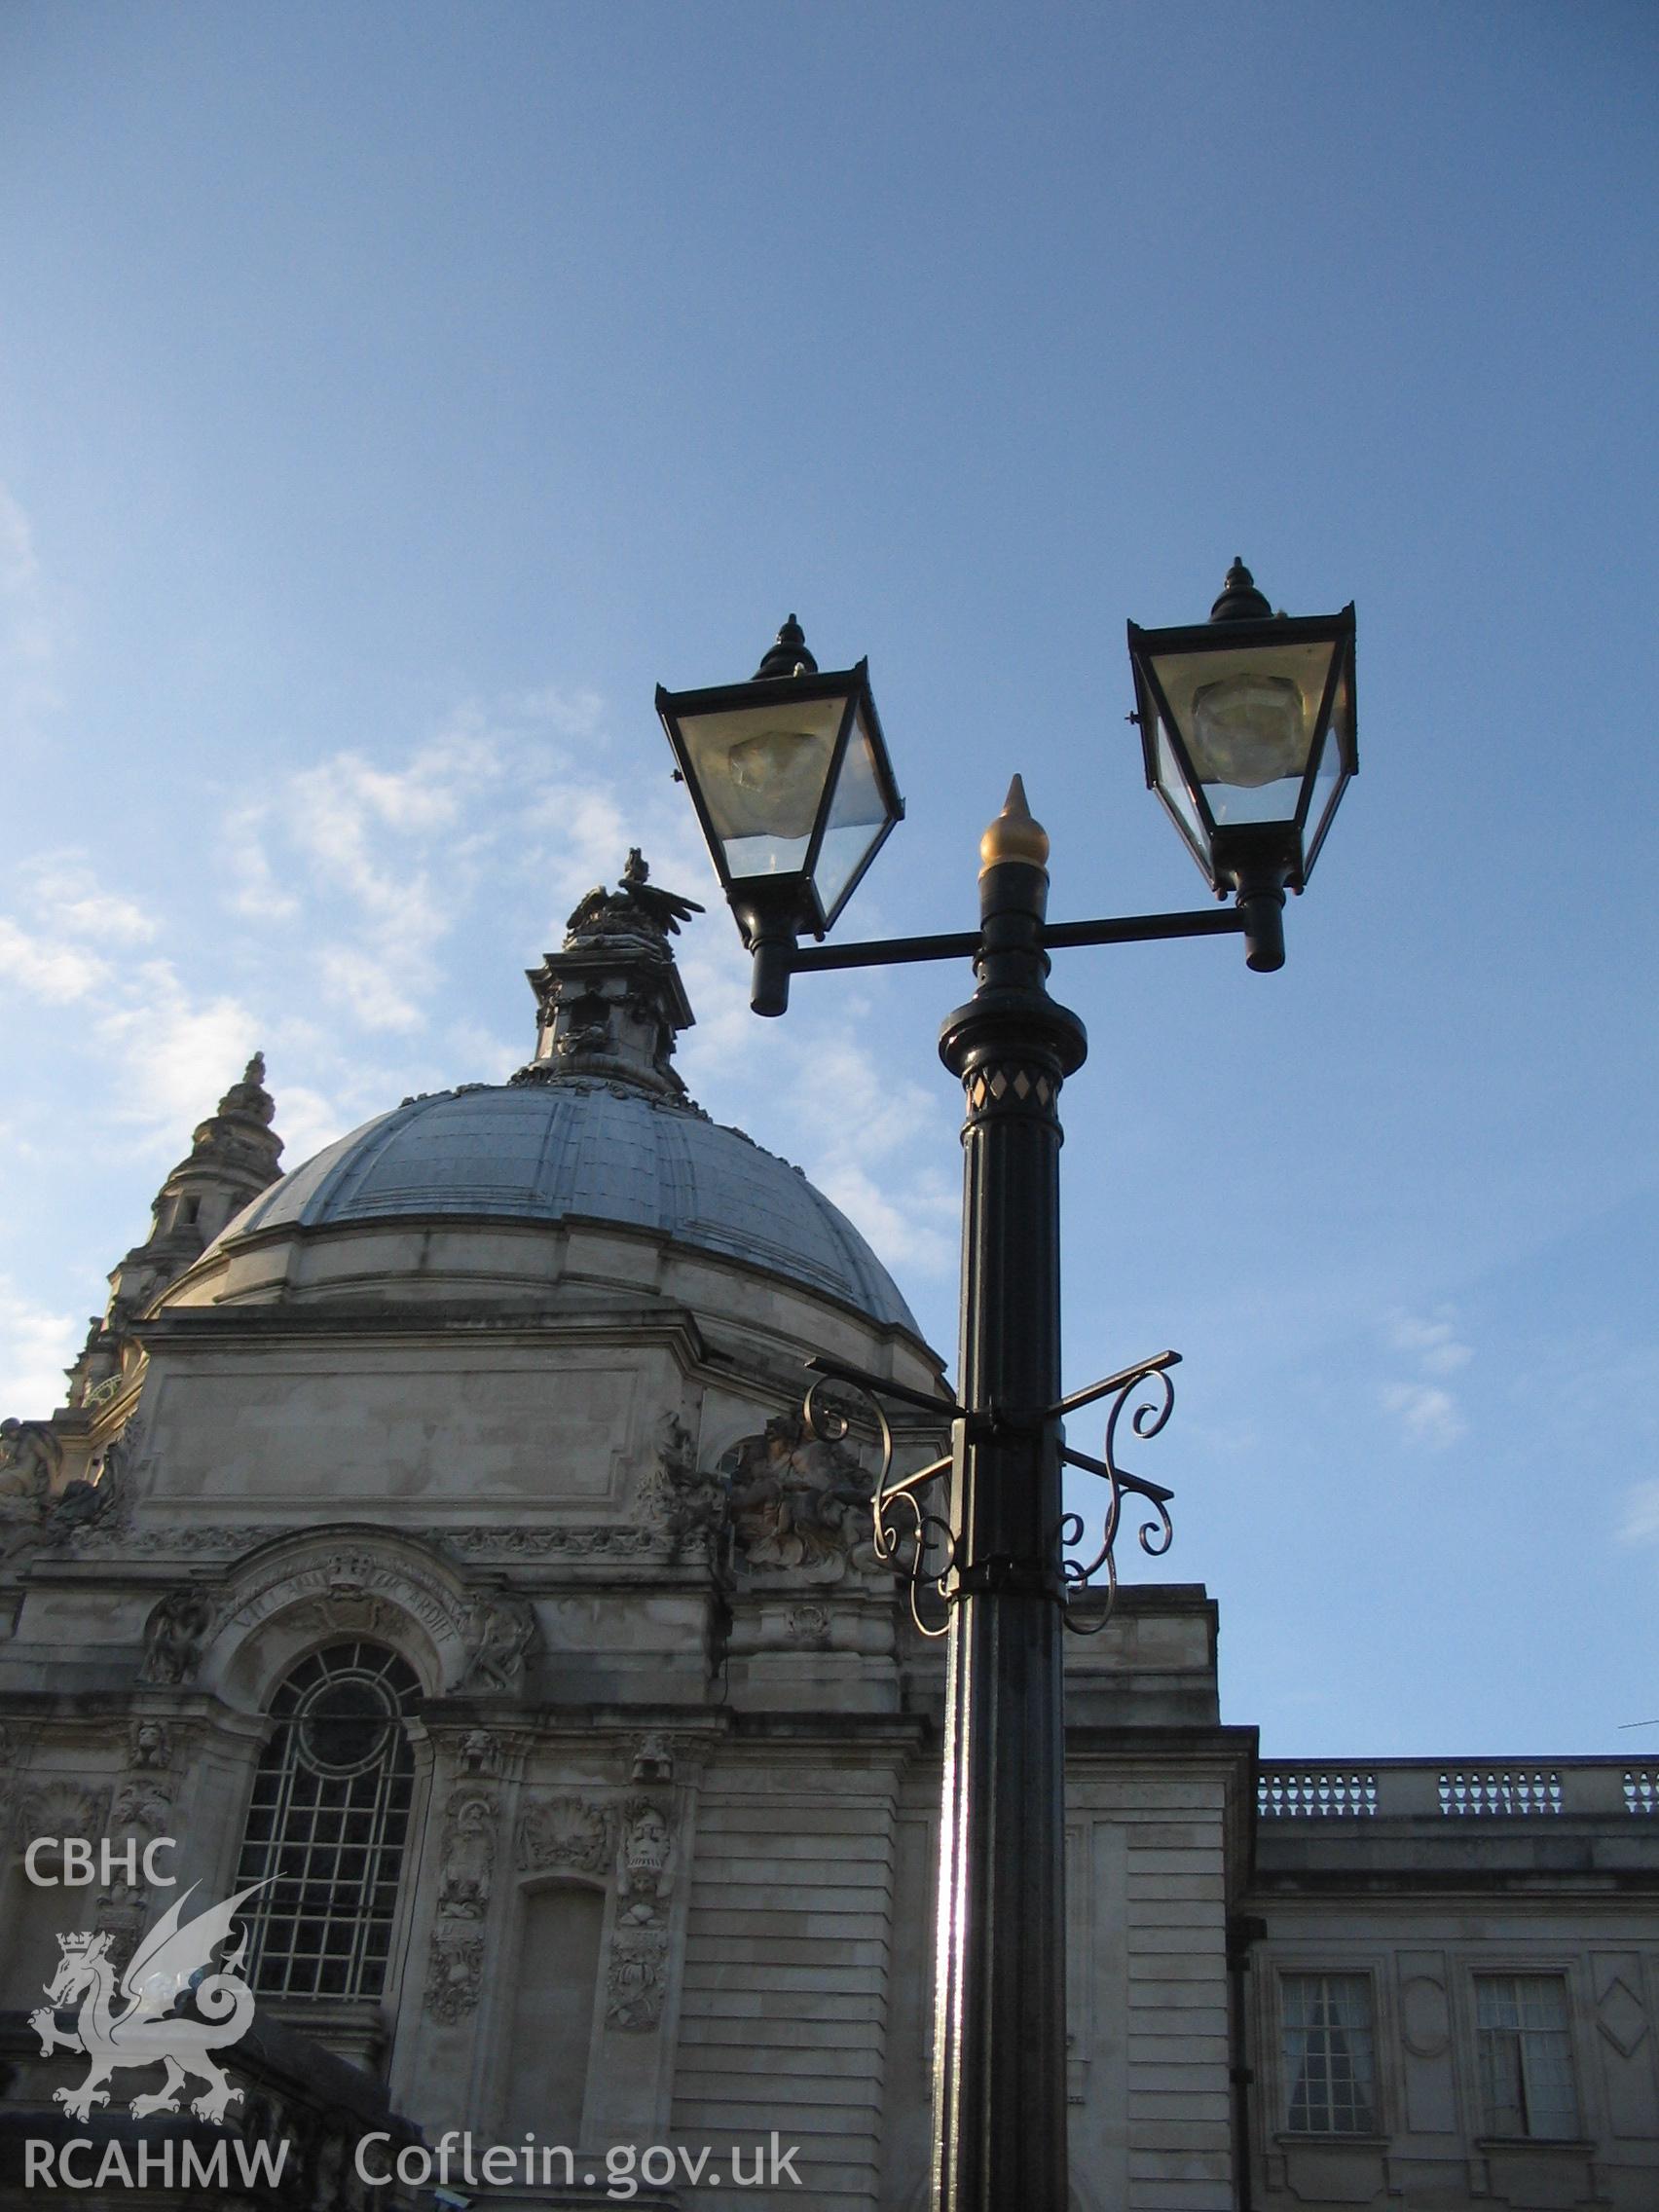 Colour digital photograph showing part of the exterior of Cardiff City Hall.